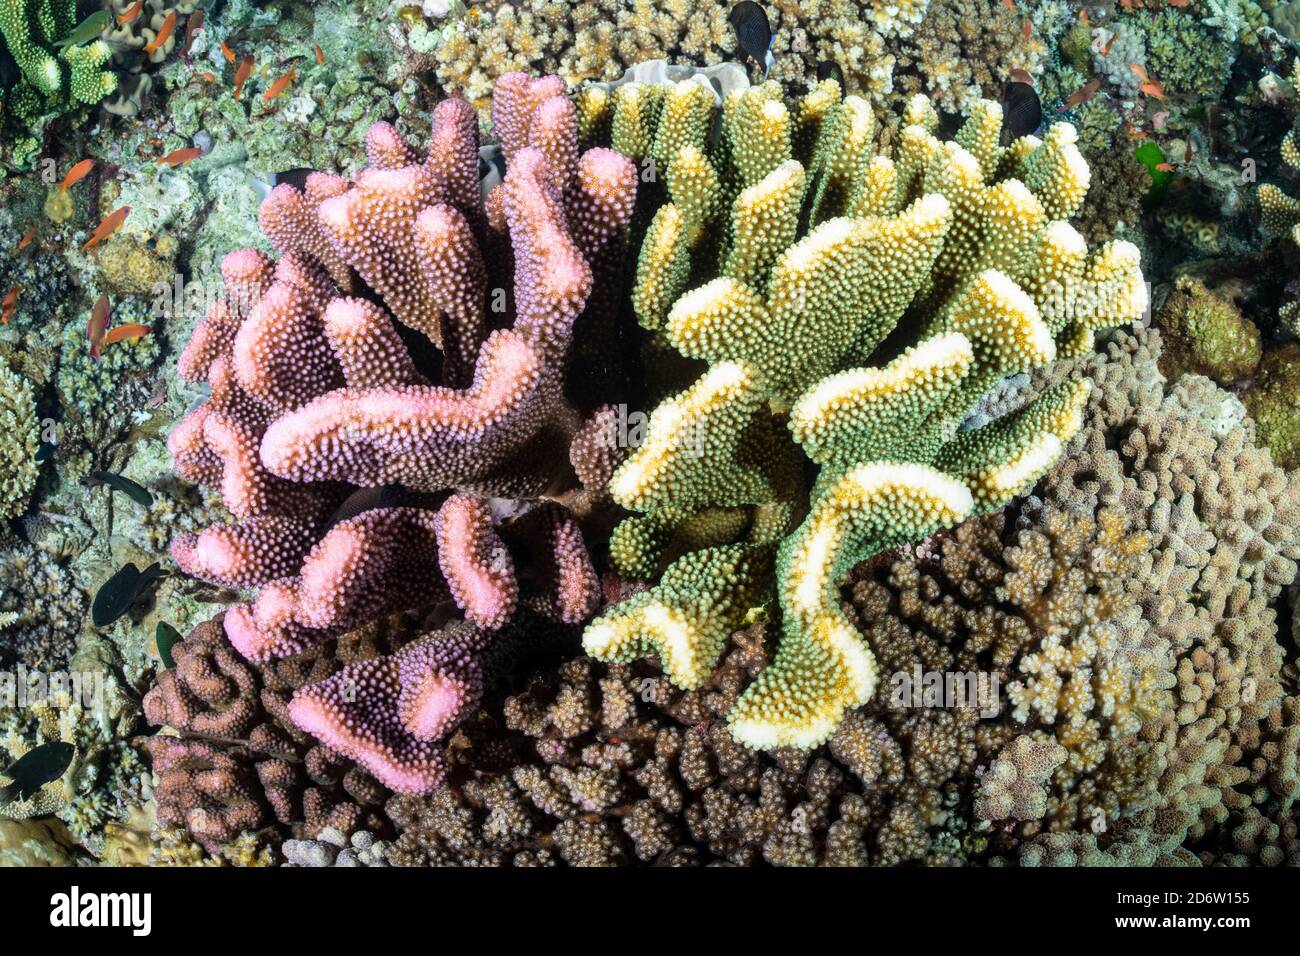 Two differently colored colonies of branching coral,  Pocillopora eydouxi,  compete for the same location on a shallow reef. Vatui-I-Ra, Bligh Water, Stock Photo